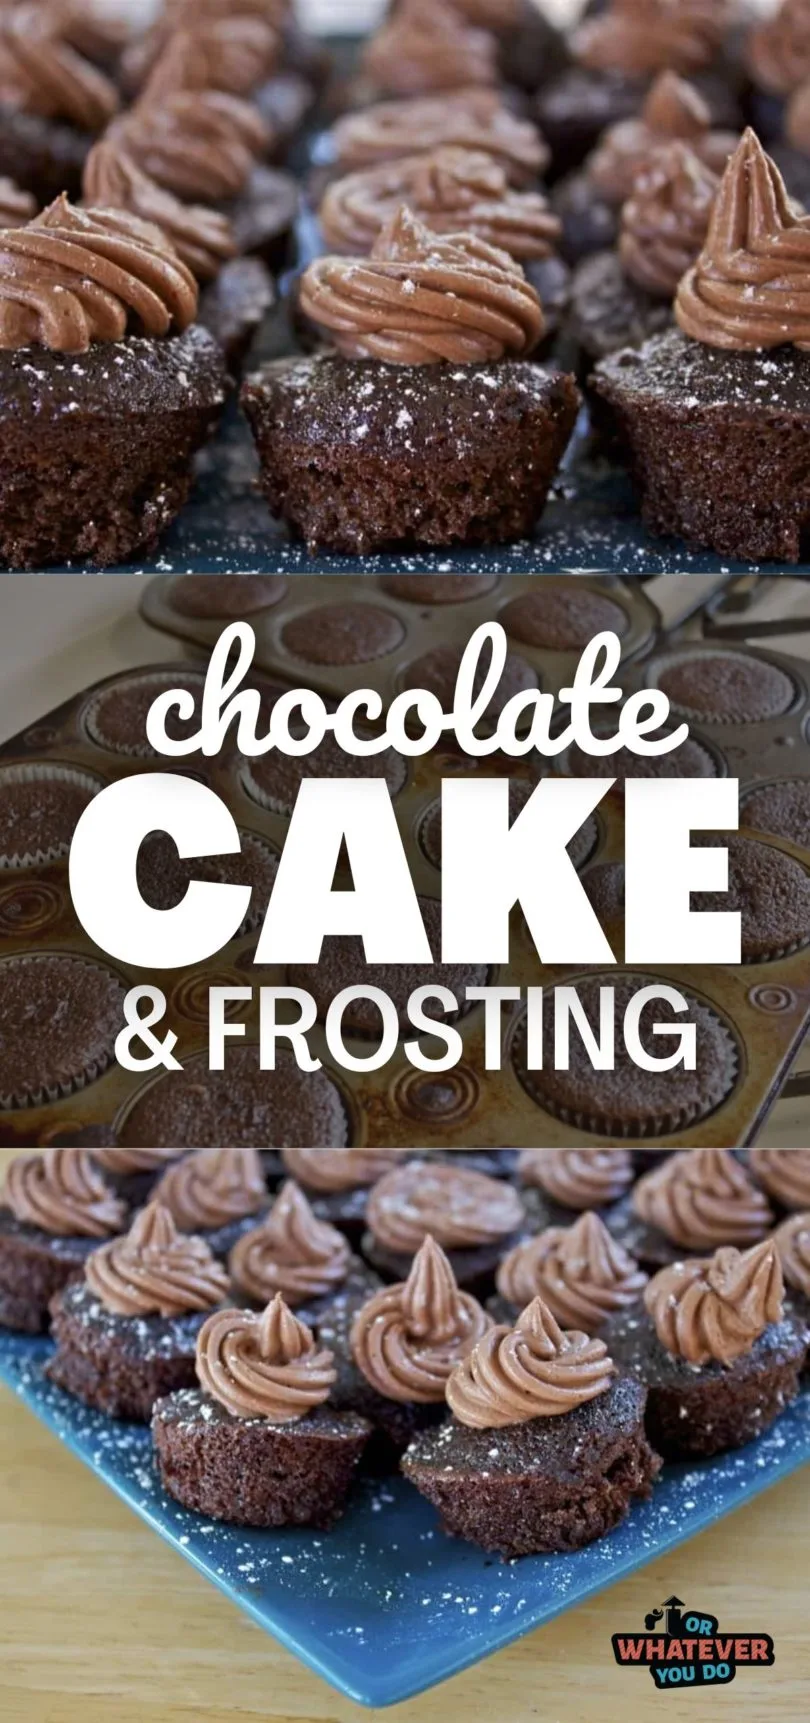 Ovaltine Chocolate Cake and Frosting - Or Whatever You Do